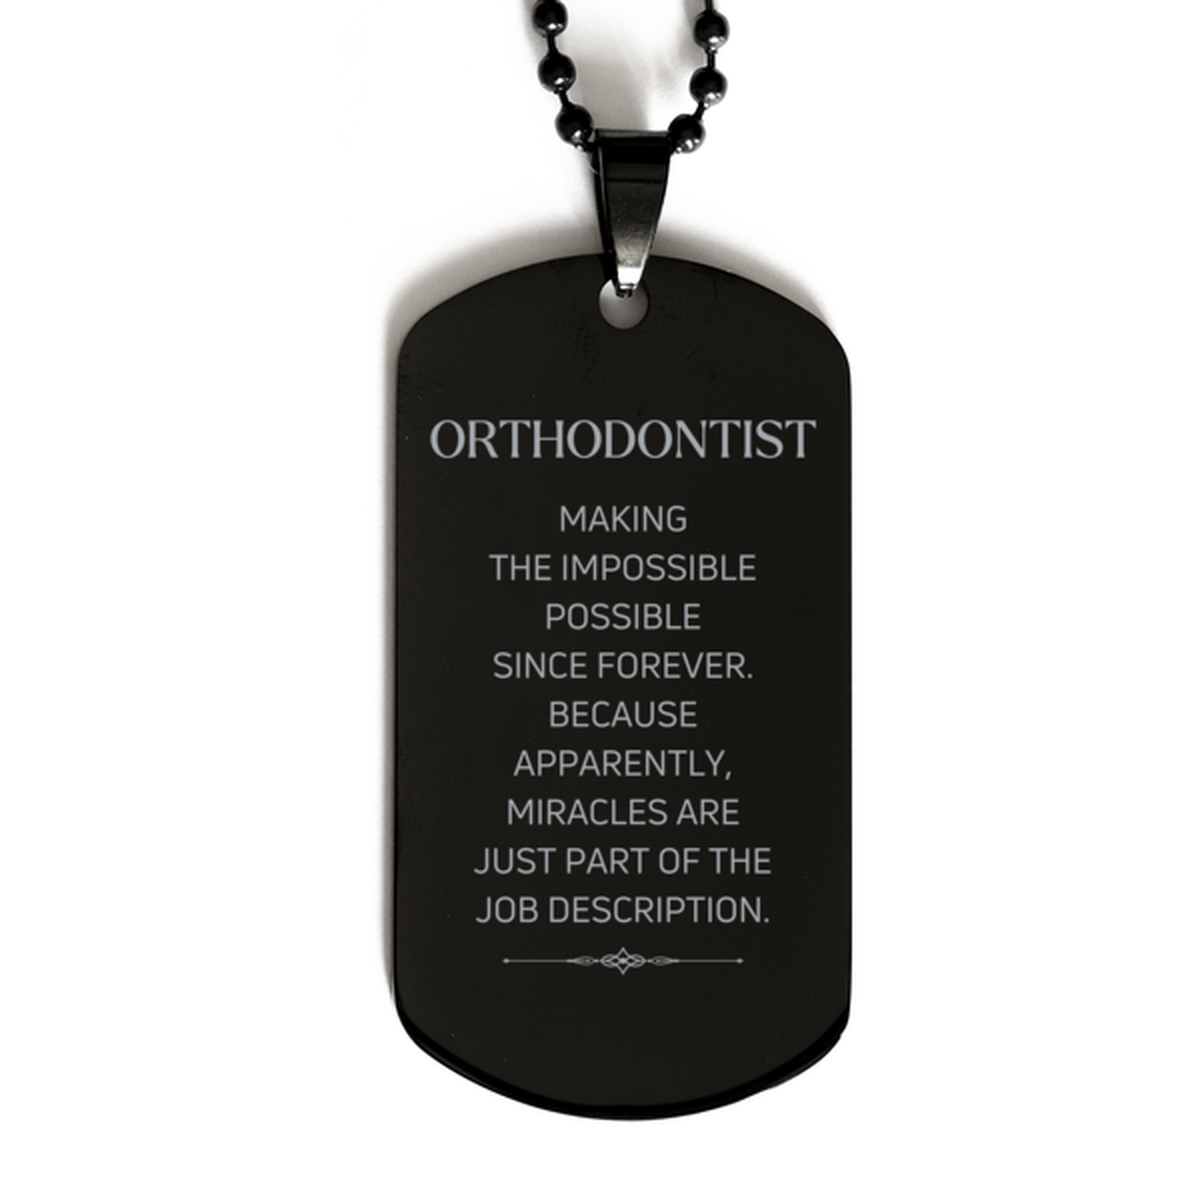 Funny Orthodontist Gifts, Miracles are just part of the job description, Inspirational Birthday Black Dog Tag For Orthodontist, Men, Women, Coworkers, Friends, Boss